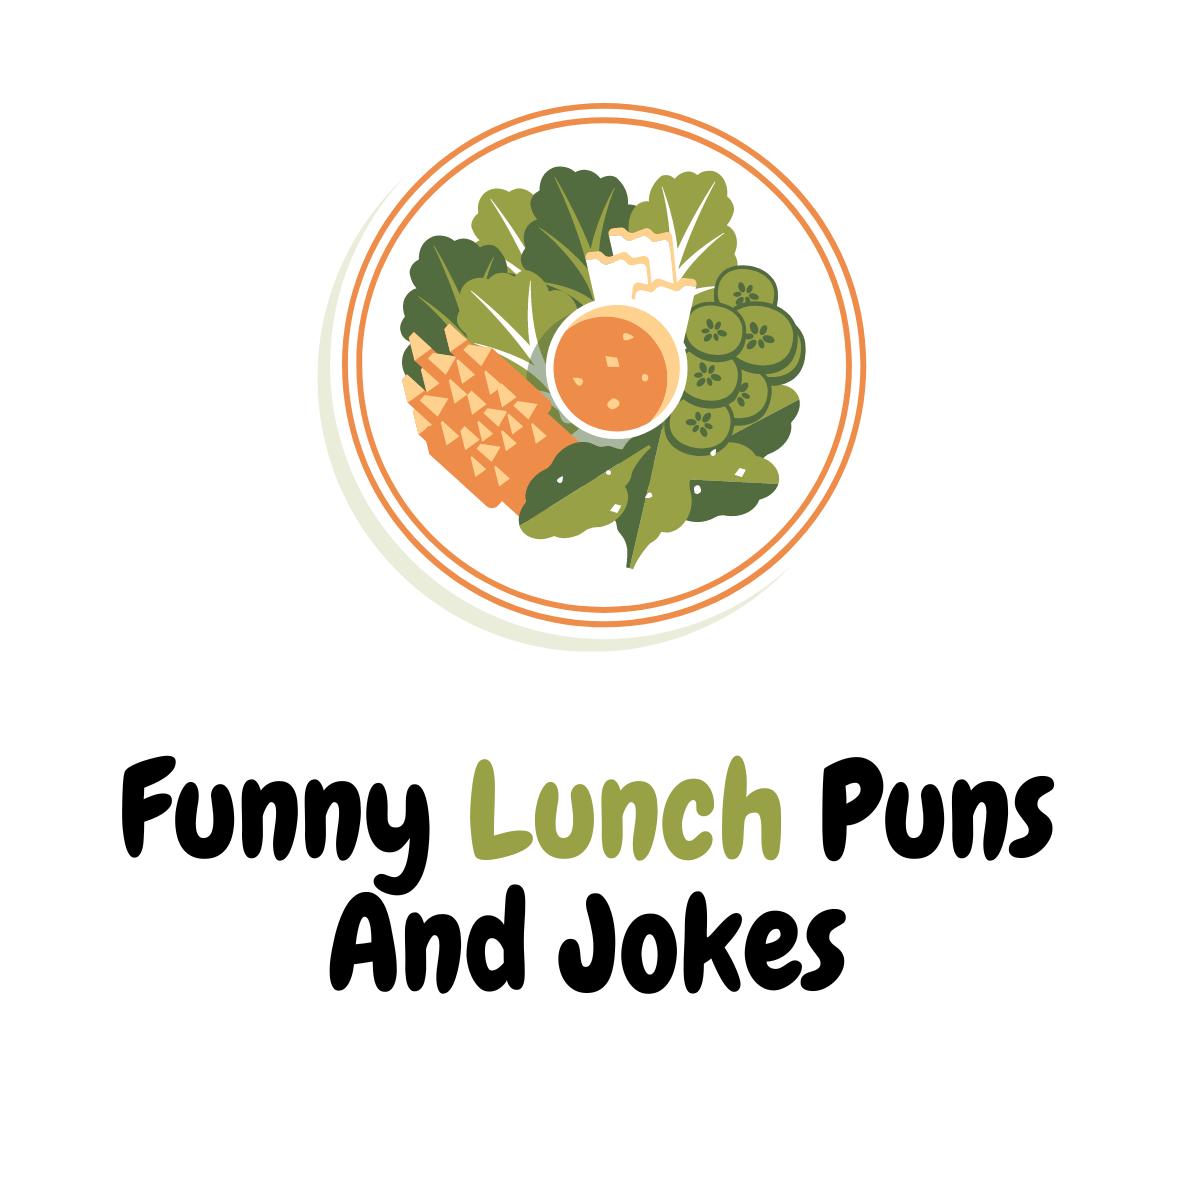 Funny Lunch Puns And Jokes